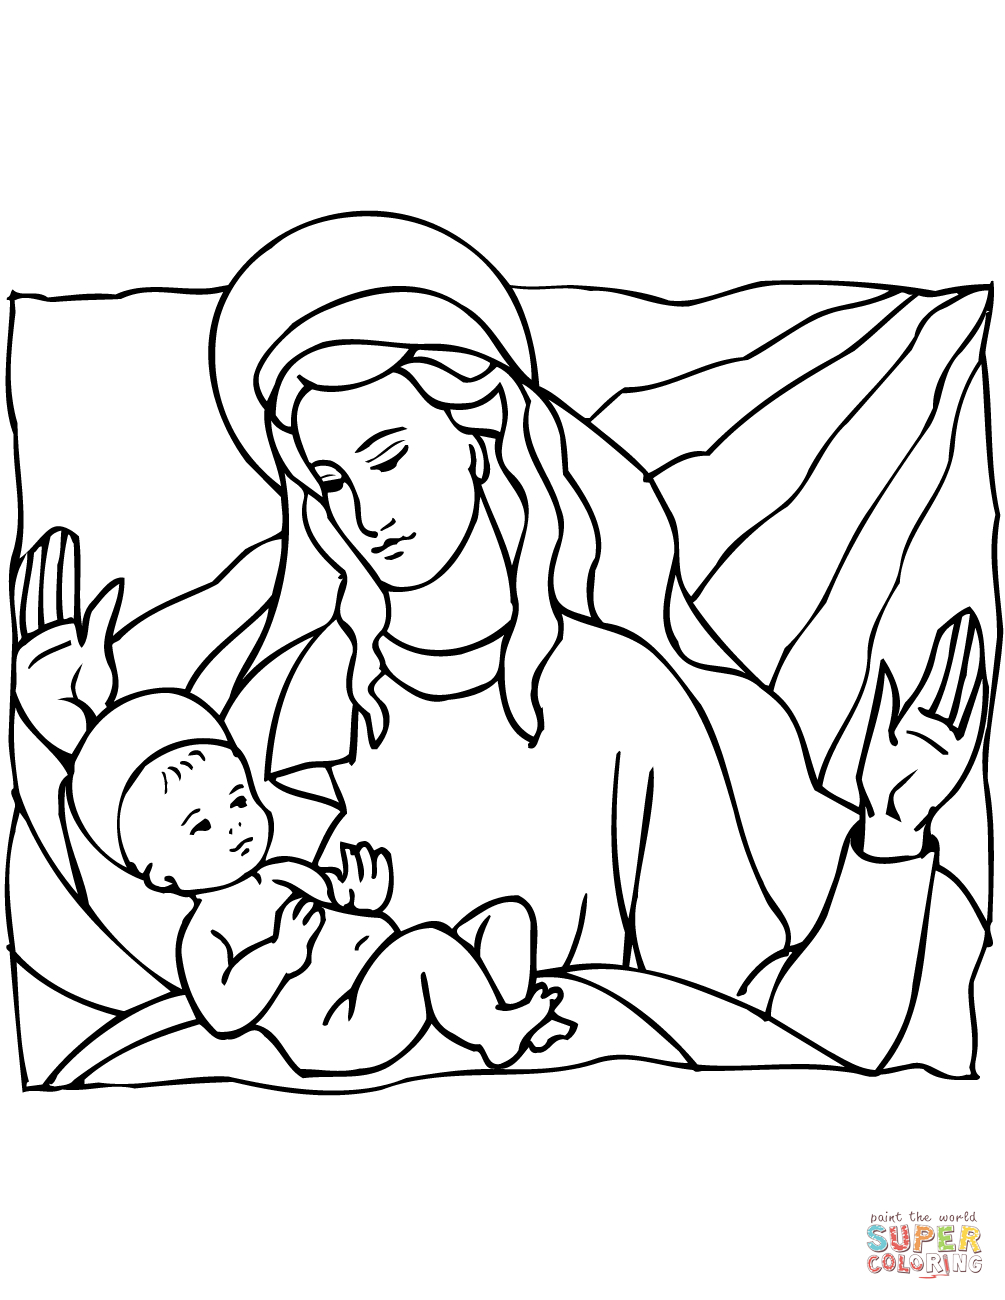 Mary And Baby Jesus Coloring Page | Free Printable Coloring Pages - Free Printable Christmas Baby Jesus Coloring Pages